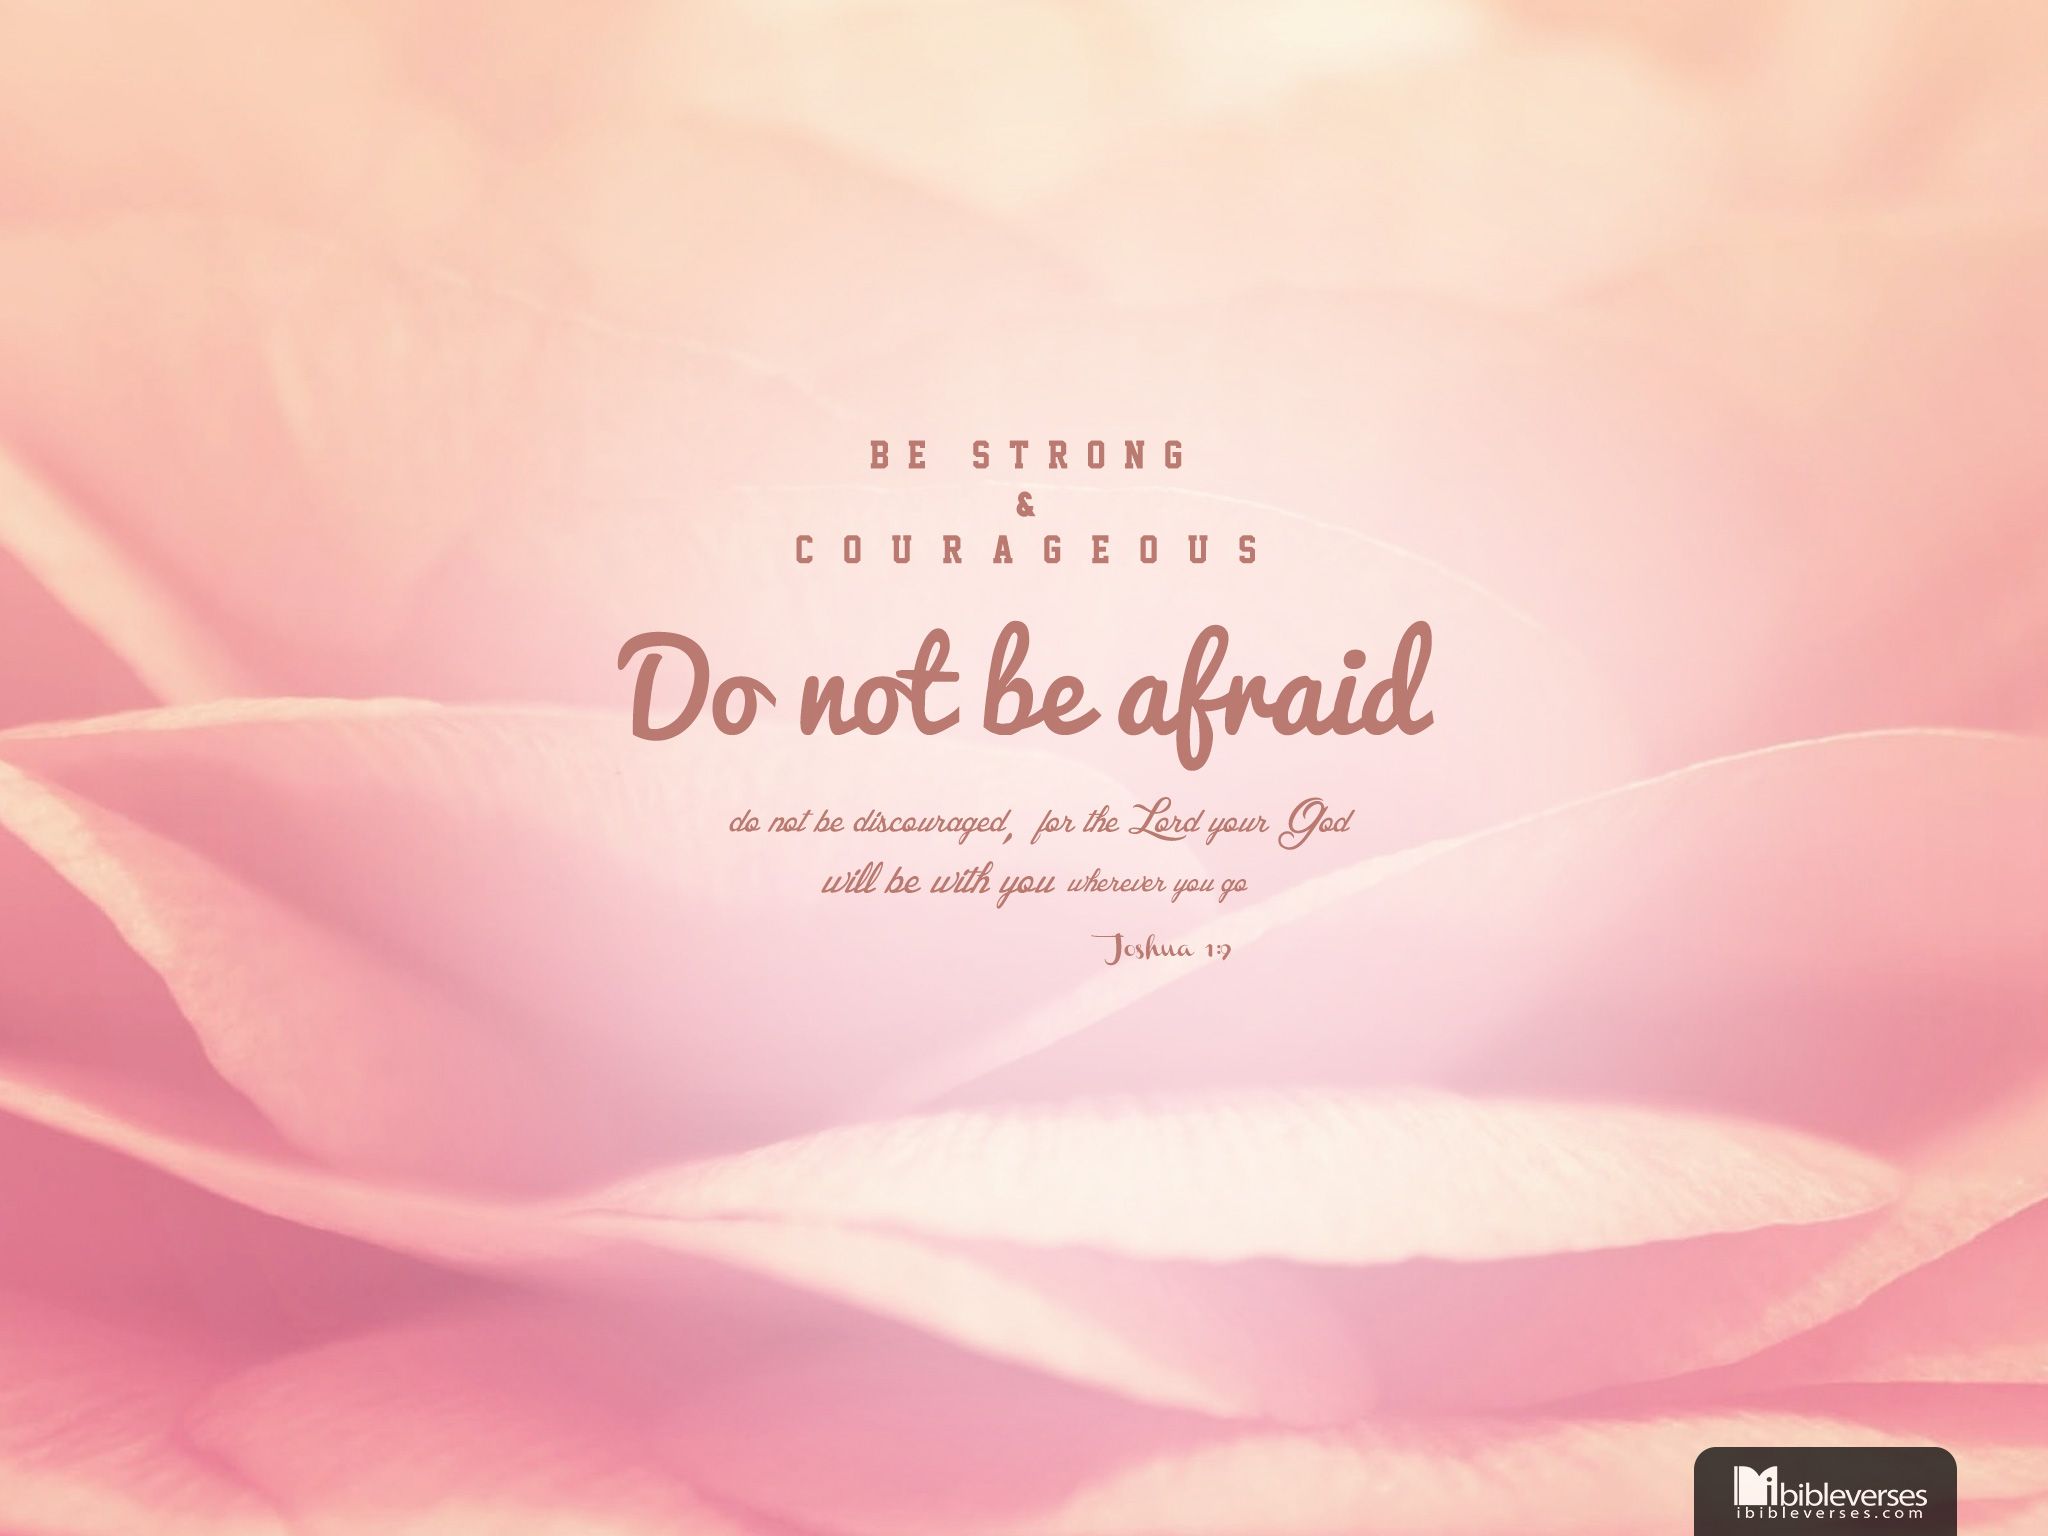 Pink Aesthetic Wallpaper With Bible Verses Aesthetic Design Iphone | My ...